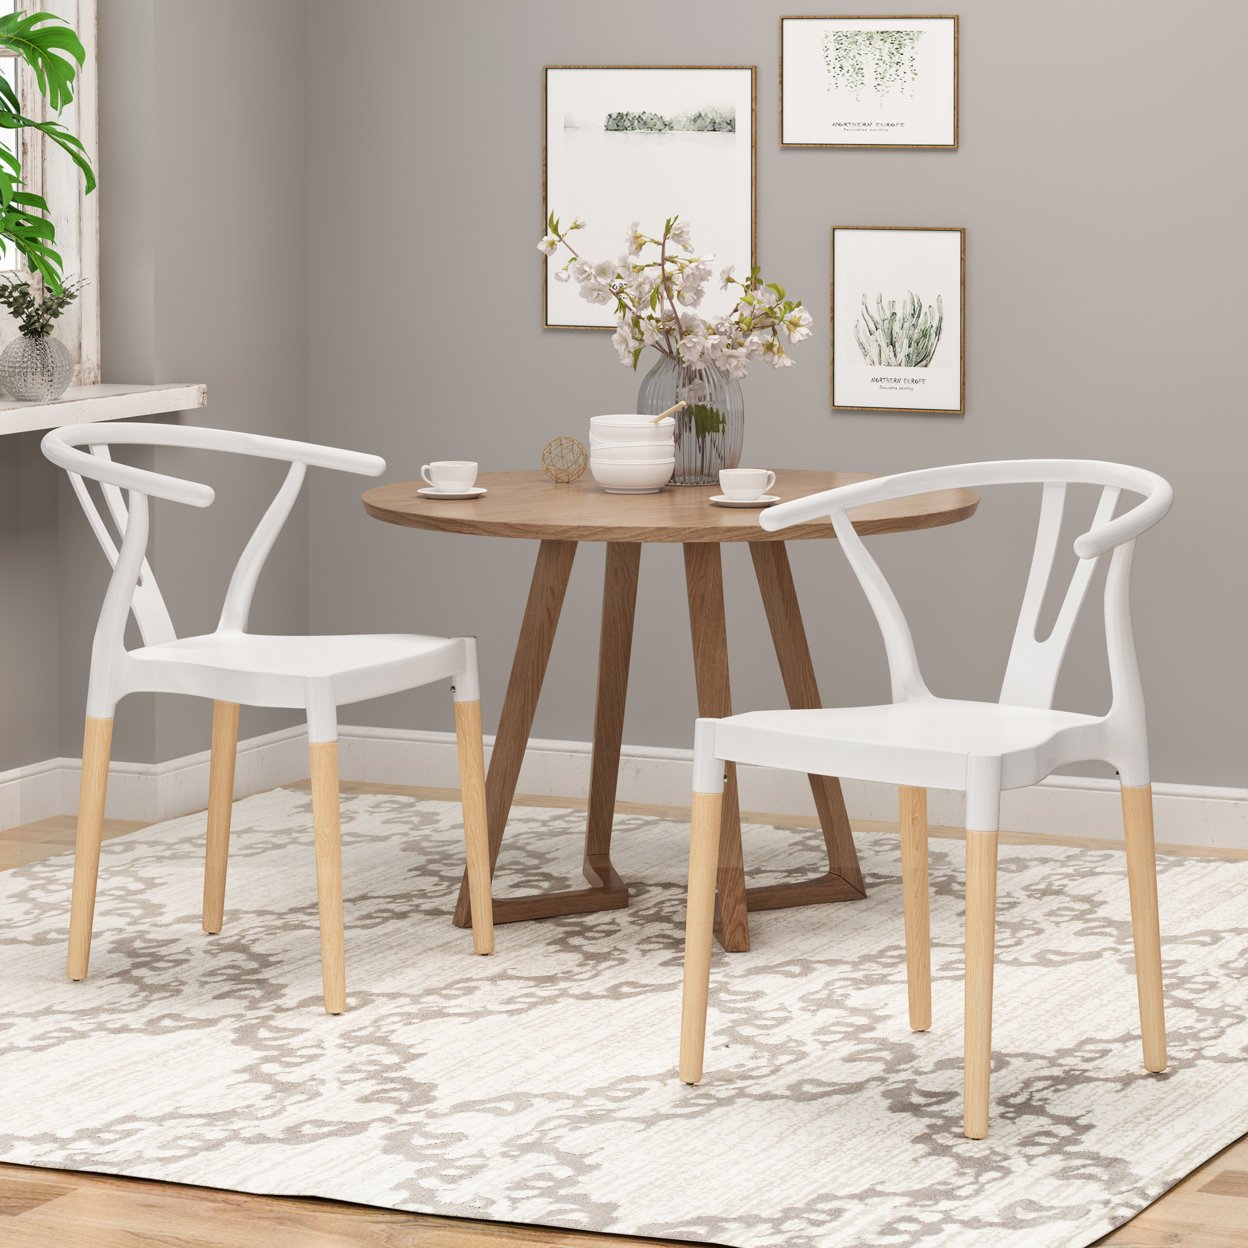 Victoria Modern Dining Chair With Beech Wood Legs (Set Of 2) - White + Natural